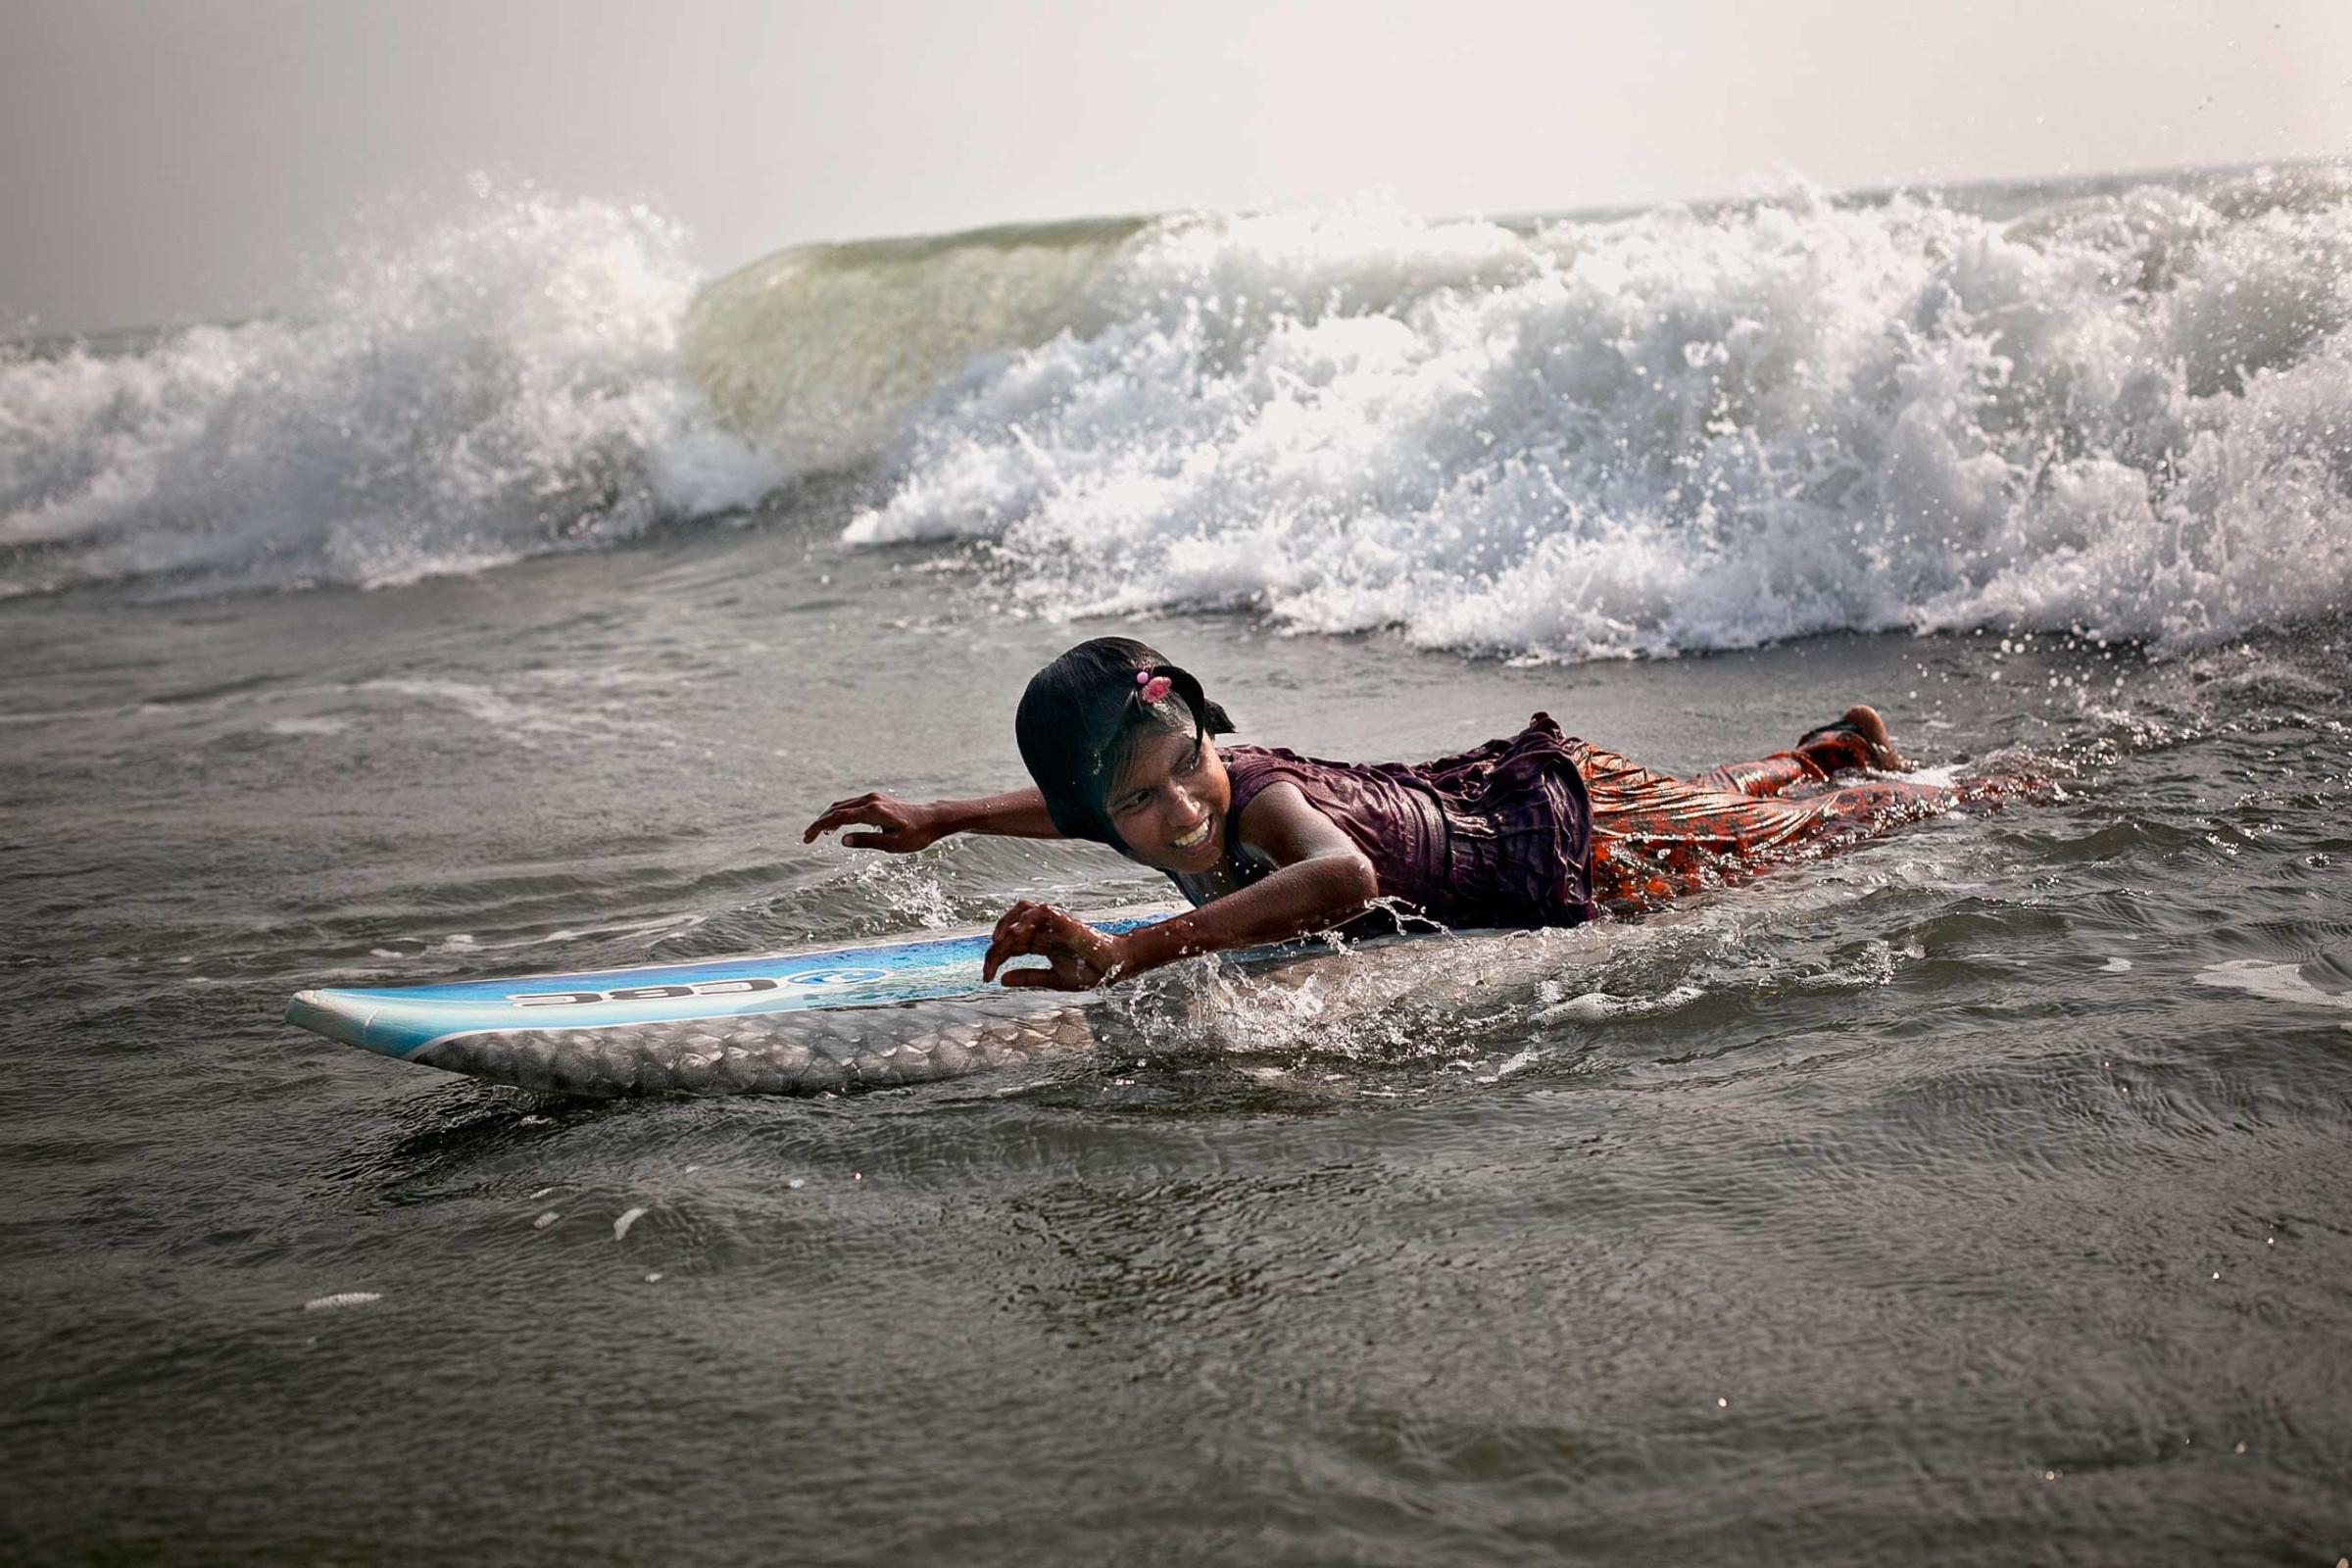 Ten-year-old Johanara surfs. The Bangladeshi surf girls are a group of eight outgoing and spunky girls ranging in ages 10 to 13 years old, who live and work in Cox's Bazar, Bangladesh. Poverty is forcing them into an early adulthood, as they are obligated to shoulder the responsibility of earning money to help feed their families. Early each morning, rain or shine, they leave their homes and make their way to the beach, where they work selling jewelry and eggs until late into the night before returning home. Their families are unable survive without the girls' income.